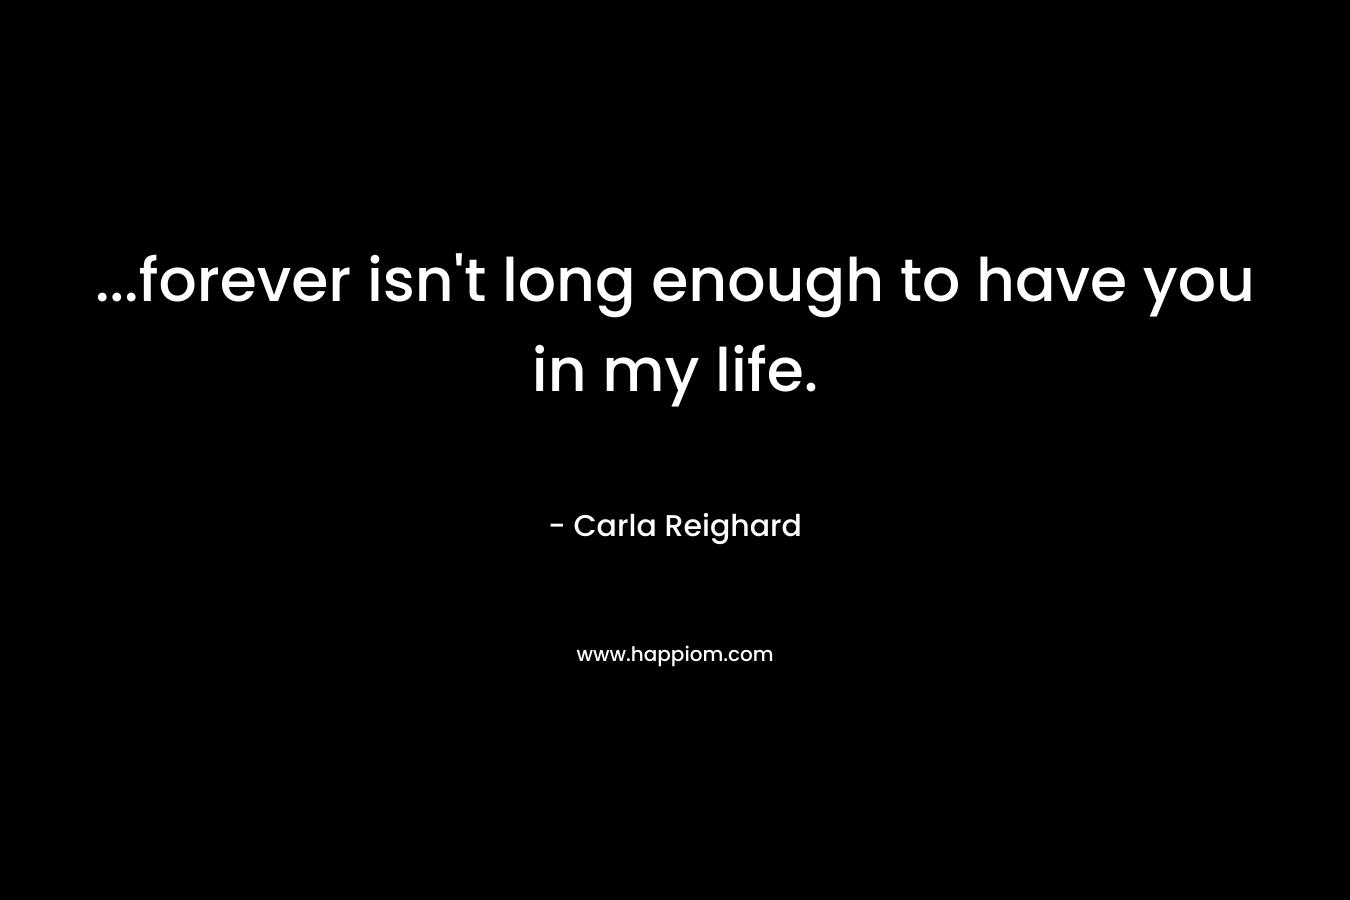 …forever isn’t long enough to have you in my life. – Carla Reighard